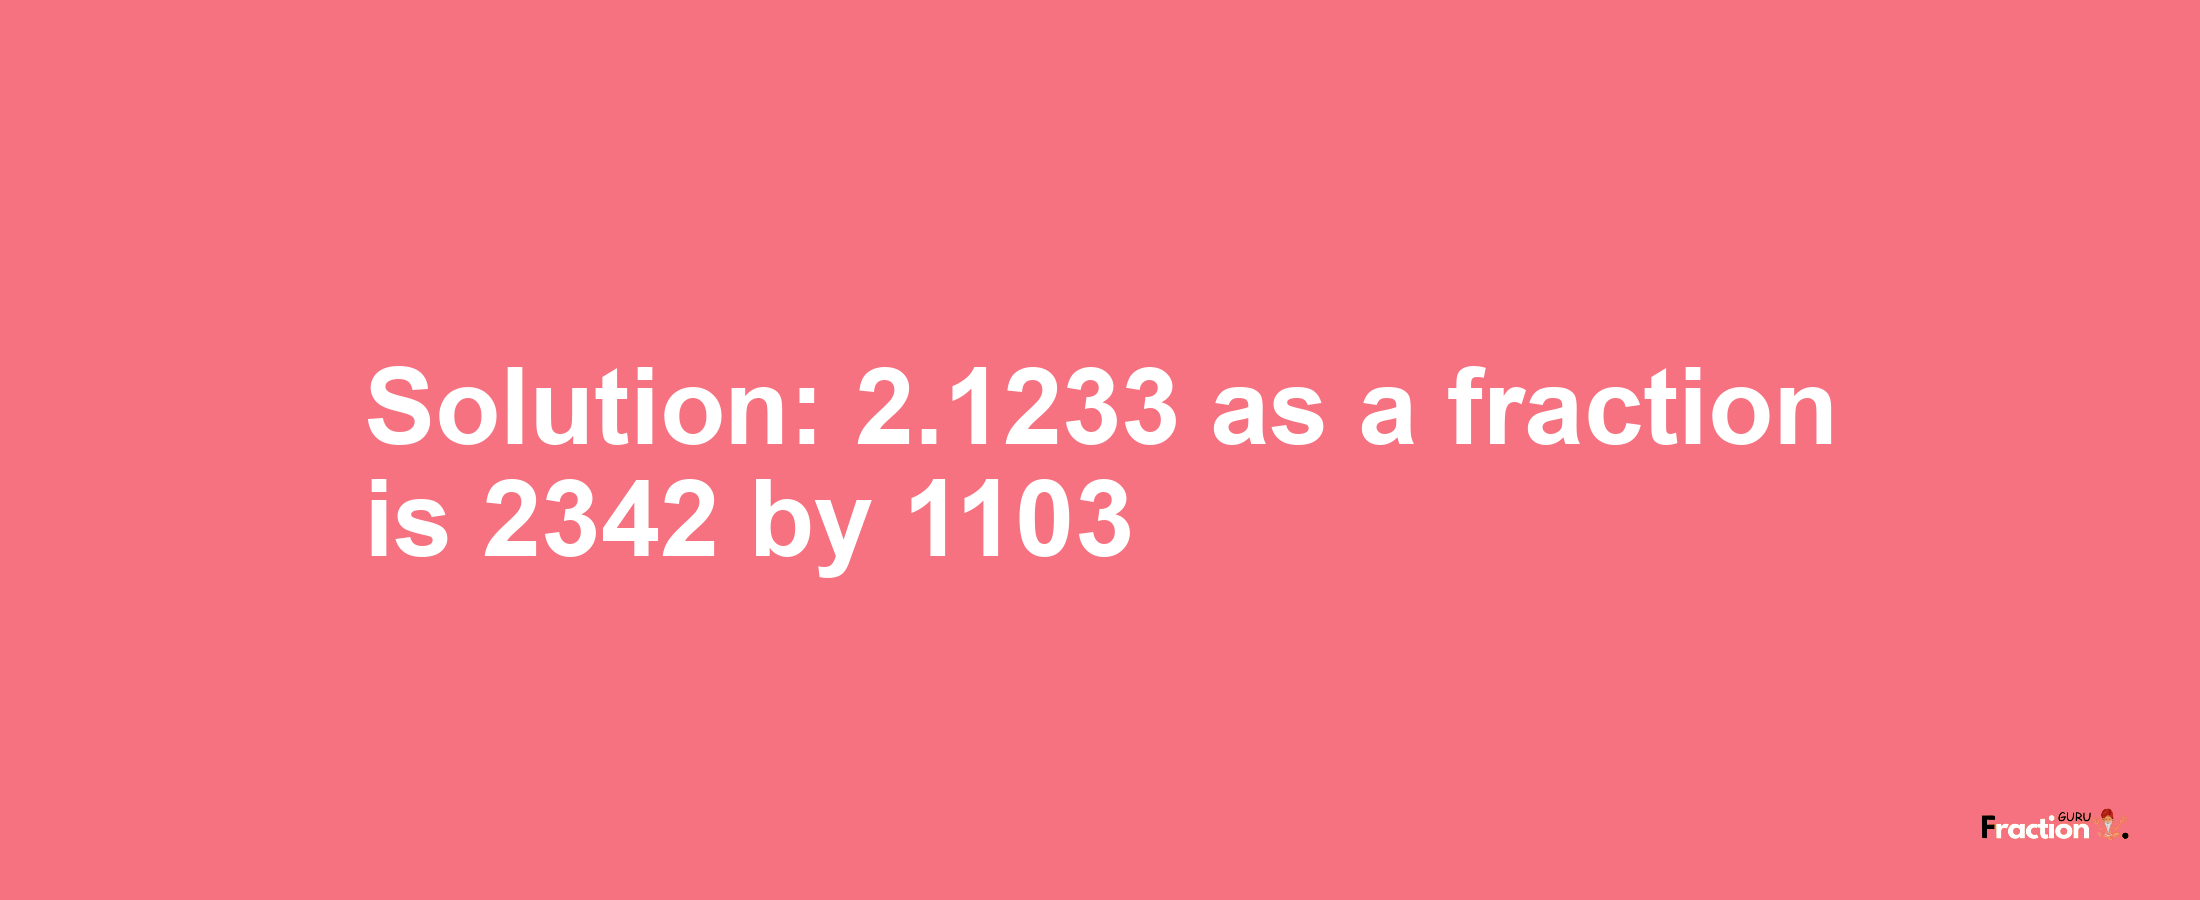 Solution:2.1233 as a fraction is 2342/1103